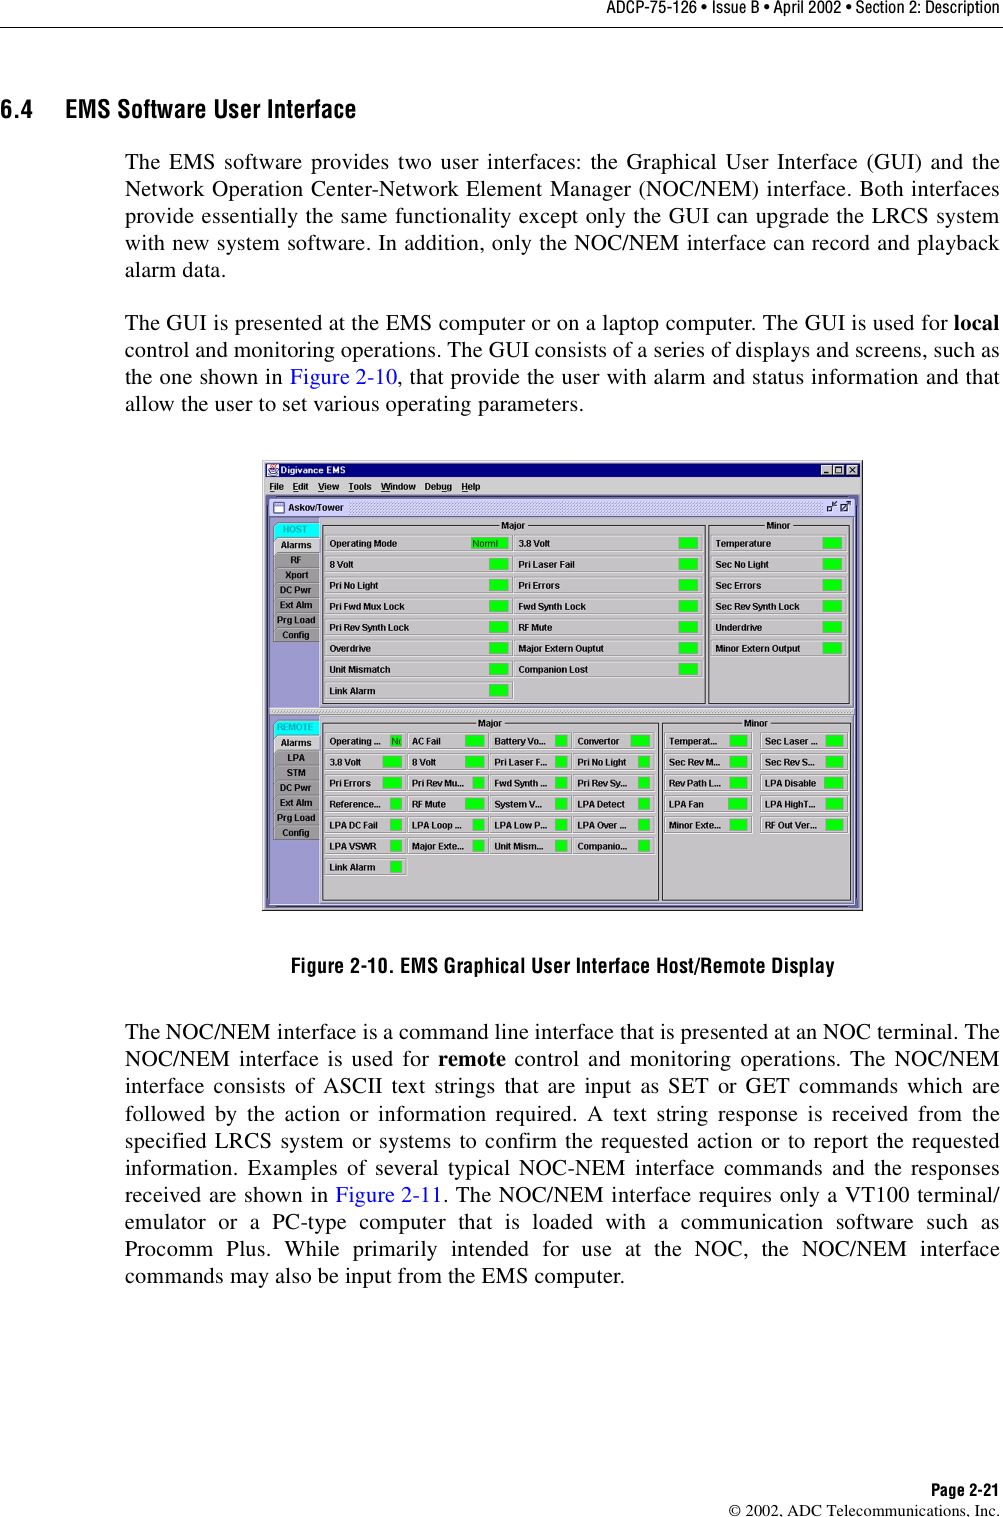 ADCP-75-126 • Issue B • April 2002 • Section 2: DescriptionPage 2-21©2002, ADC Telecommunications, Inc.6.4 EMS Software User InterfaceThe EMS software provides two user interfaces: the Graphical User Interface (GUI) and theNetwork Operation Center-Network Element Manager (NOC/NEM) interface. Both interfacesprovide essentially the same functionality except only the GUI can upgrade the LRCS systemwith new system software. In addition, only the NOC/NEM interface can record and playbackalarm data.The GUI is presented at the EMS computer or on alaptop computer. The GUI is used for localcontrol and monitoring operations. The GUI consists of aseries of displays and screens, such asthe one shown in Figure 2-10,that provide the user with alarm and status information and thatallow the user to set various operating parameters.Figure 2-10. EMS Graphical User Interface Host/Remote DisplayThe NOC/NEM interface is acommand line interface that is presented at an NOC terminal. TheNOC/NEM interface is used for remote control and monitoring operations. The NOC/NEMinterface consists of ASCII text strings that are input as SET or GET commands which arefollowed by the action or information required. Atext string response is received from thespecified LRCS system or systems to confirm the requested action or to report the requestedinformation. Examples of several typical NOC-NEM interface commands and the responsesreceived are shown in Figure 2-11.The NOC/NEM interface requires only aVT100 terminal/emulator or aPC-type computer that is loaded with acommunication software such asProcomm Plus. While primarily intended for use at the NOC, the NOC/NEM interfacecommands may also be input from the EMS computer.